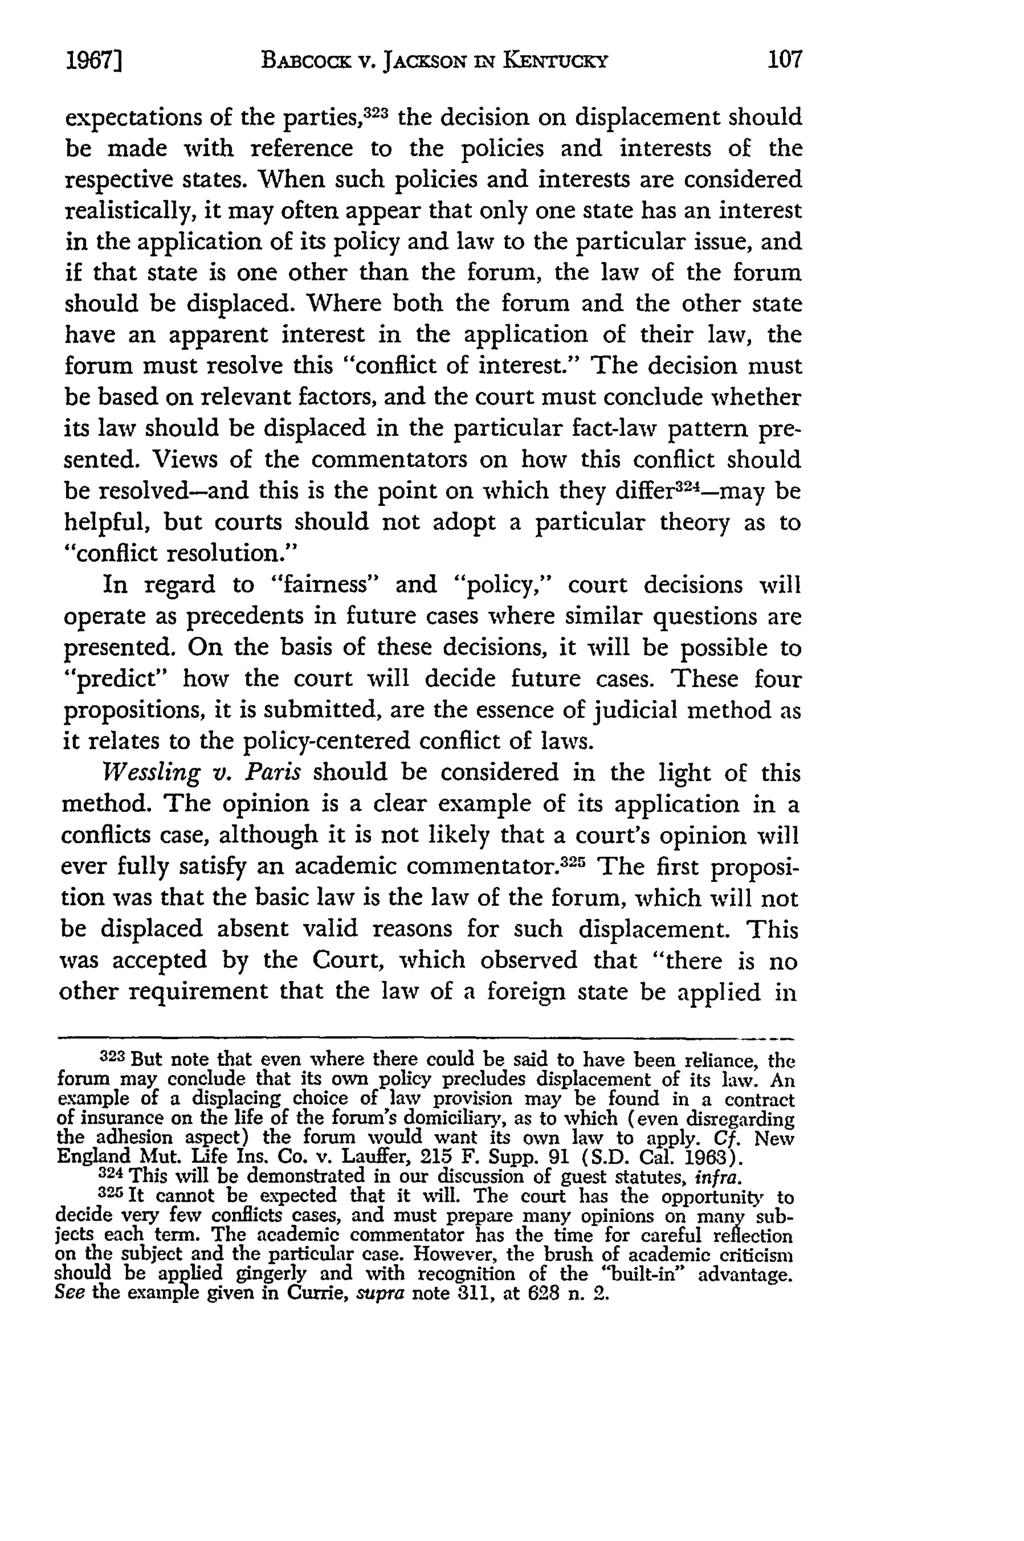 1967] BABcocK v. JAcKsoN N KENTUCKY expectations of the parties, 23 the decision on displacement should be made with reference to the policies and interests of the respective states.